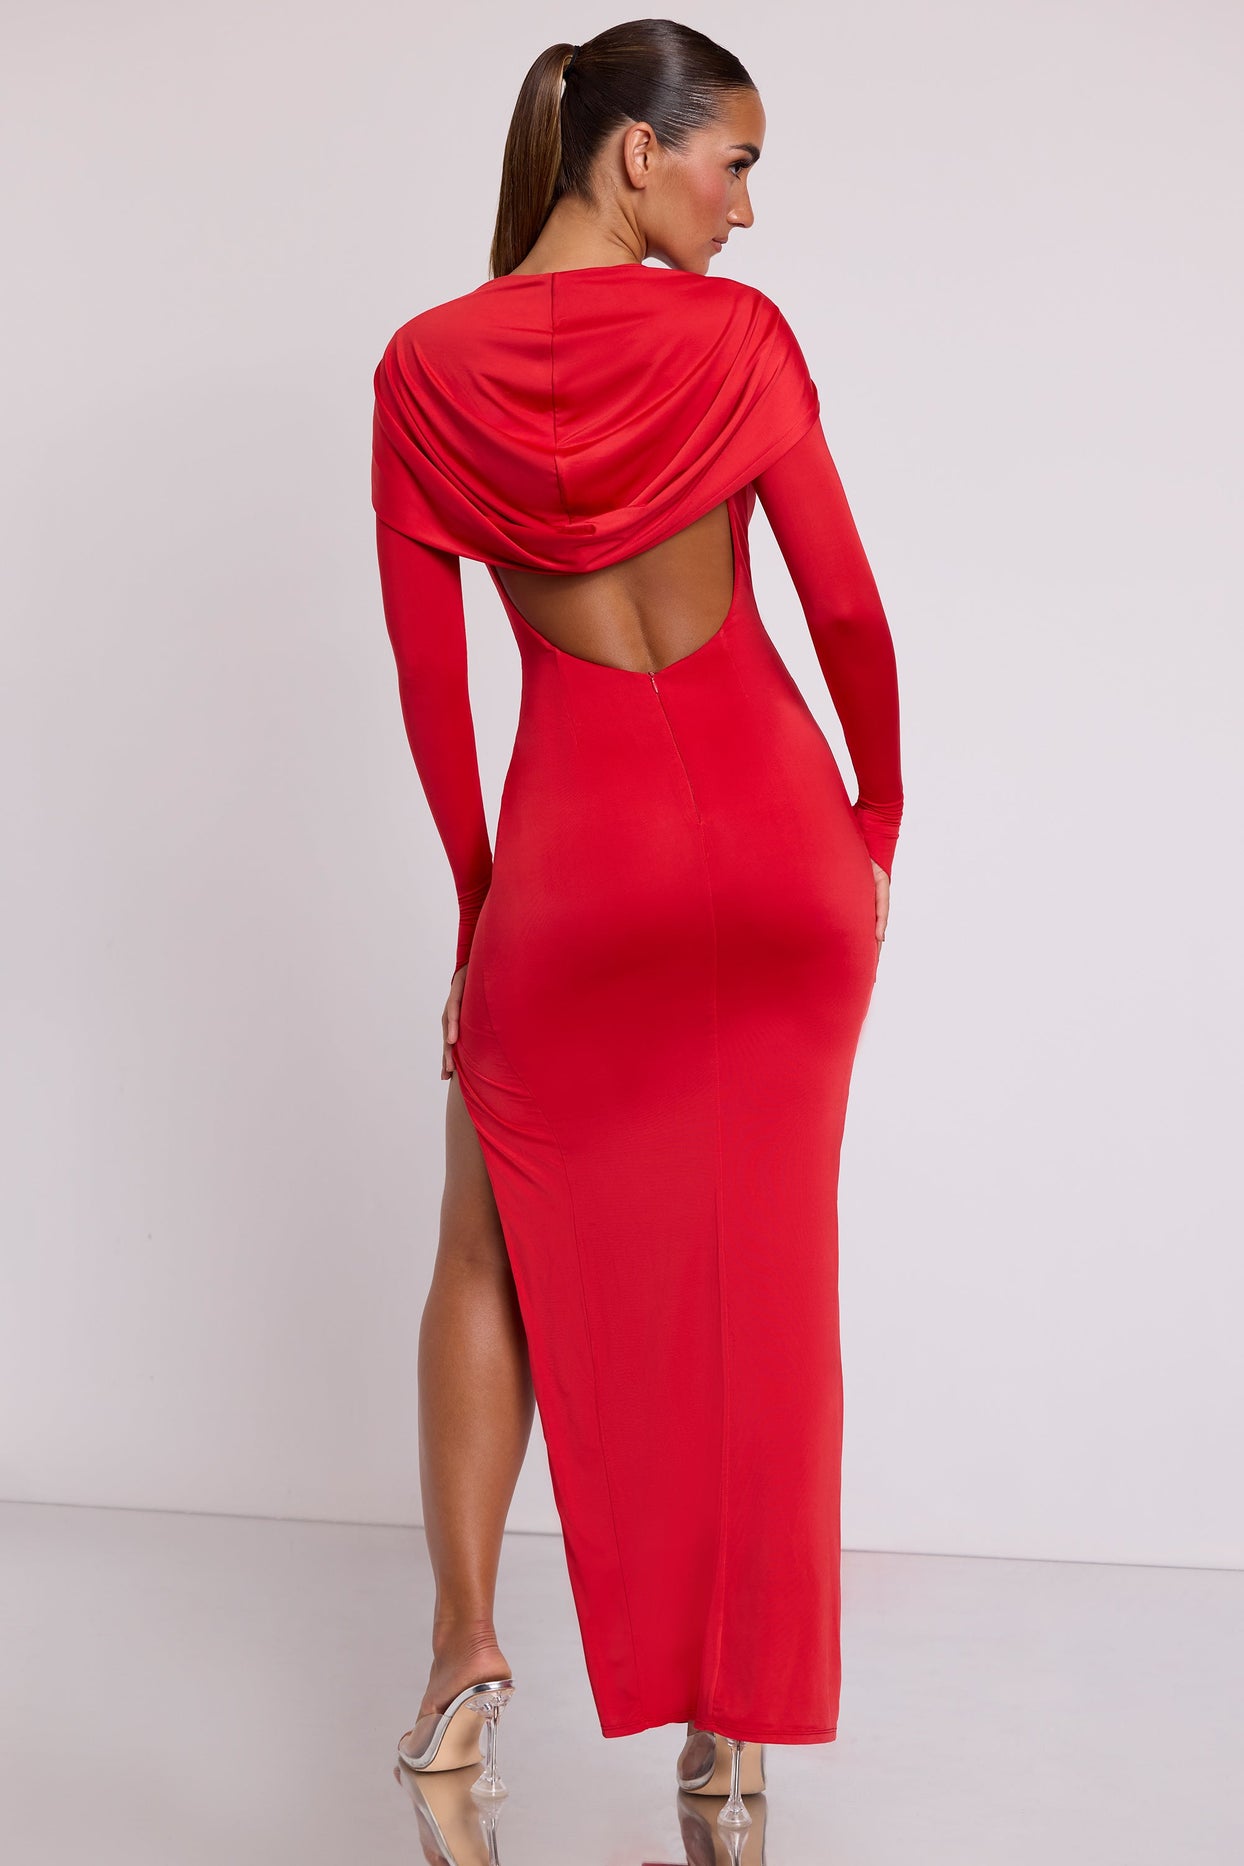 Hooded Long Sleeve Maxi Dress in Fire Red